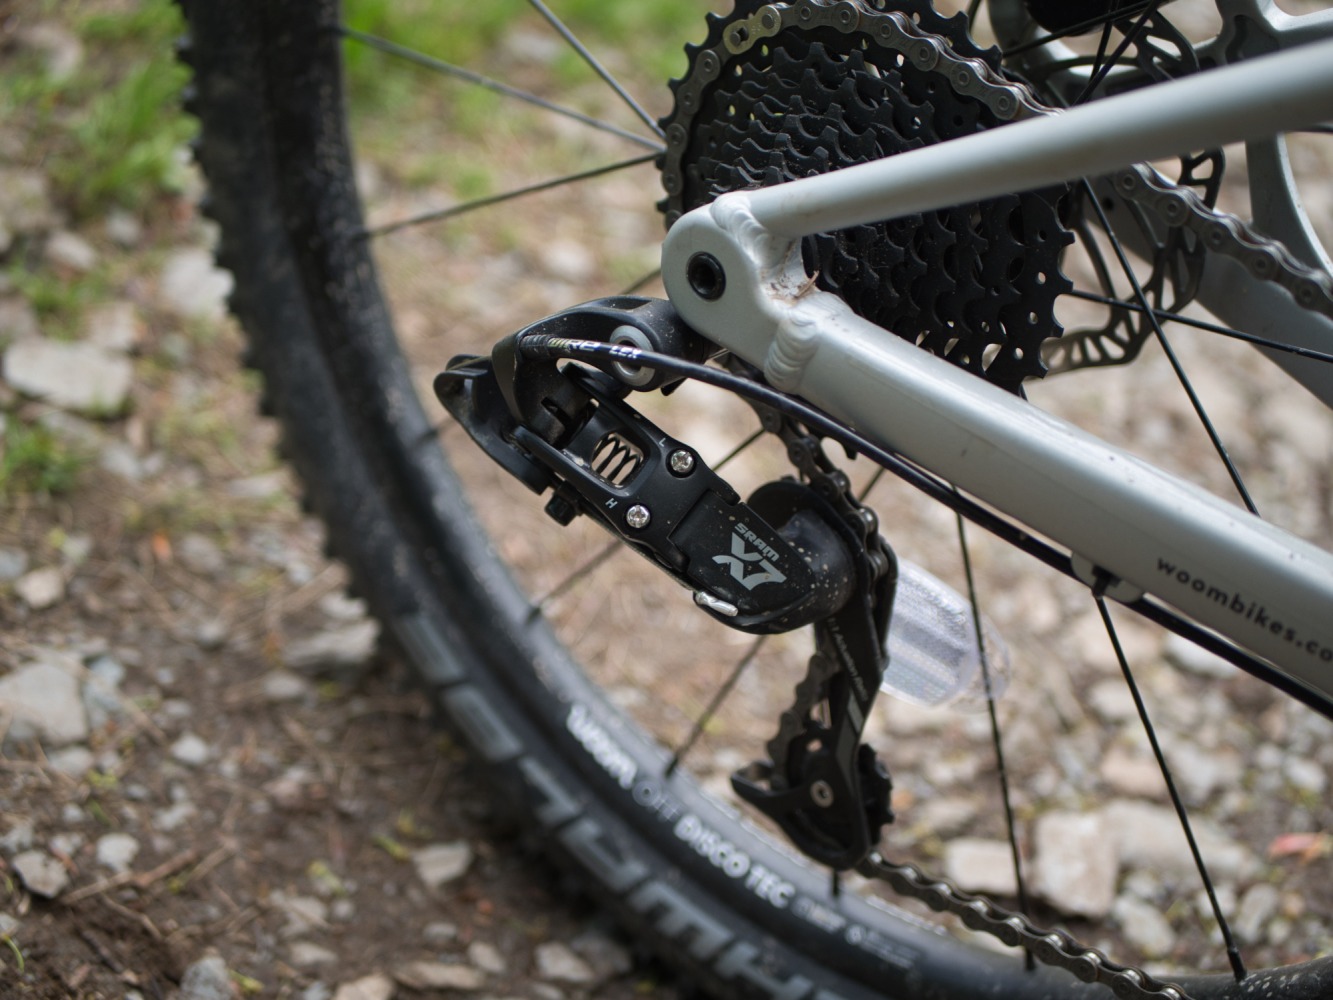 woom OFF AIR 5 review: close up of the woom OFF AIR 5 mountain bike derailleur